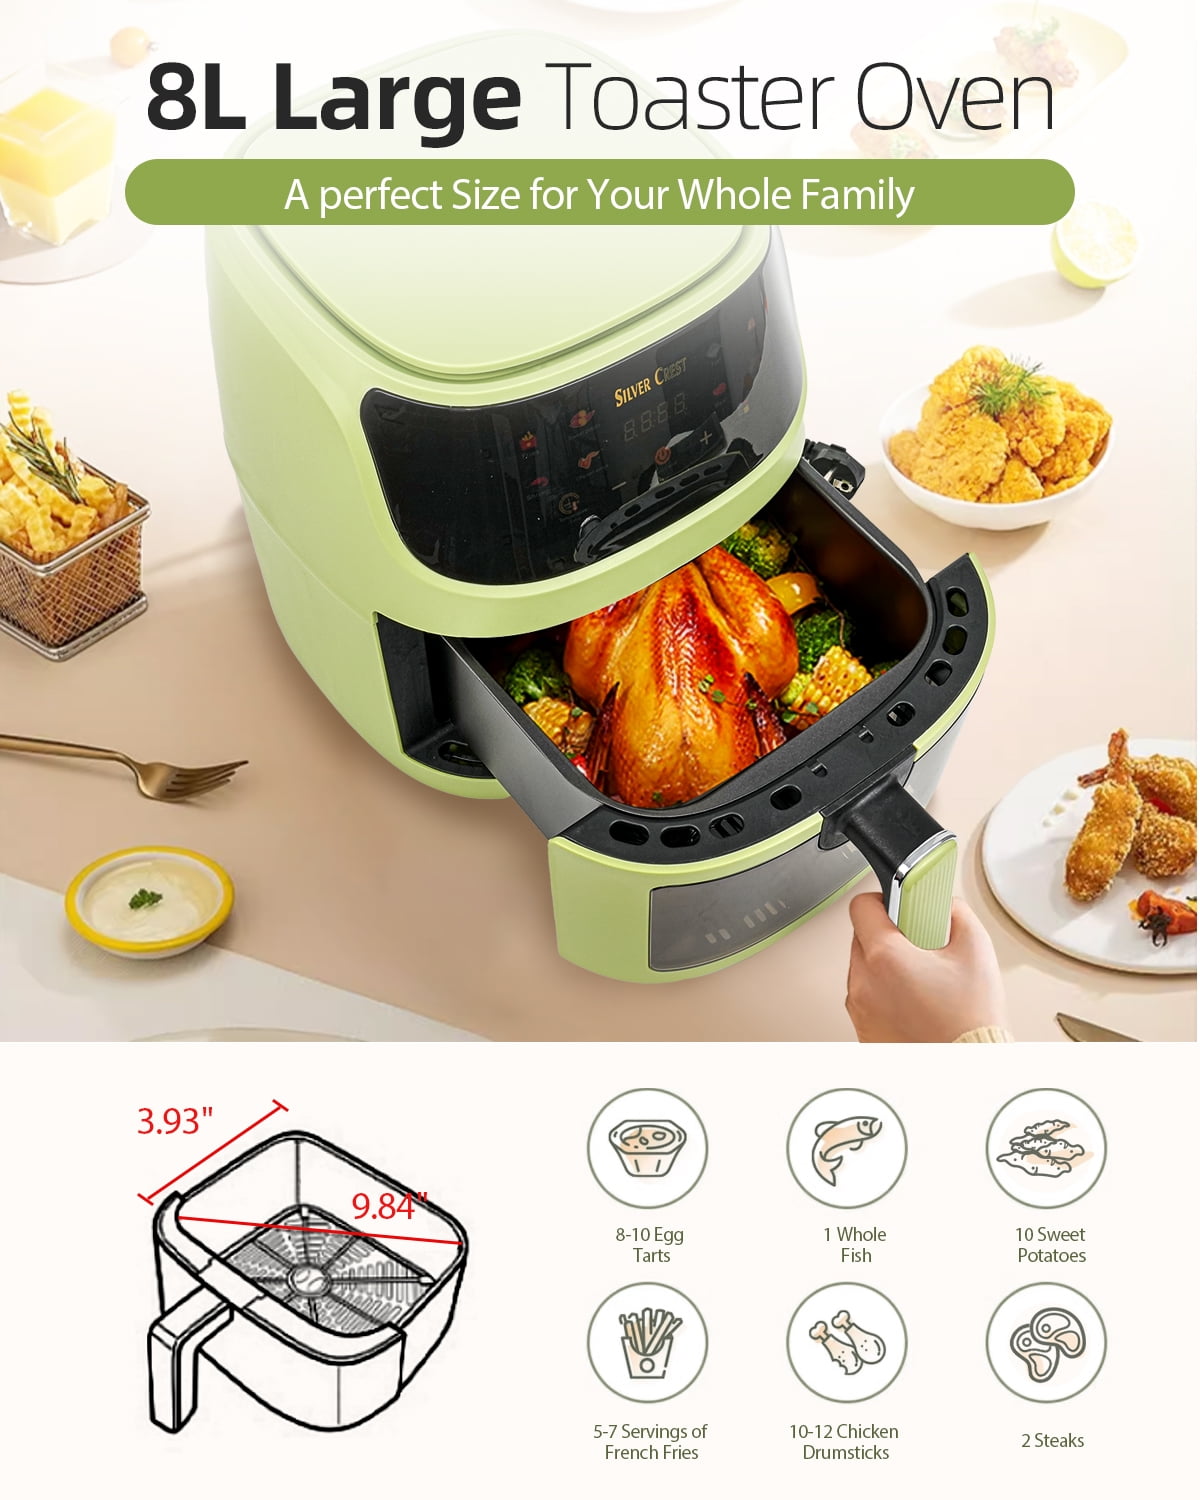 Air Fryer, PARIS RHÔNE 5.3 QT with Viewing Window & Ceramic Coated  Non-Stick Basket, Large Air Fryer Oven with 8-in-1 Functions One Touch  Control, NO